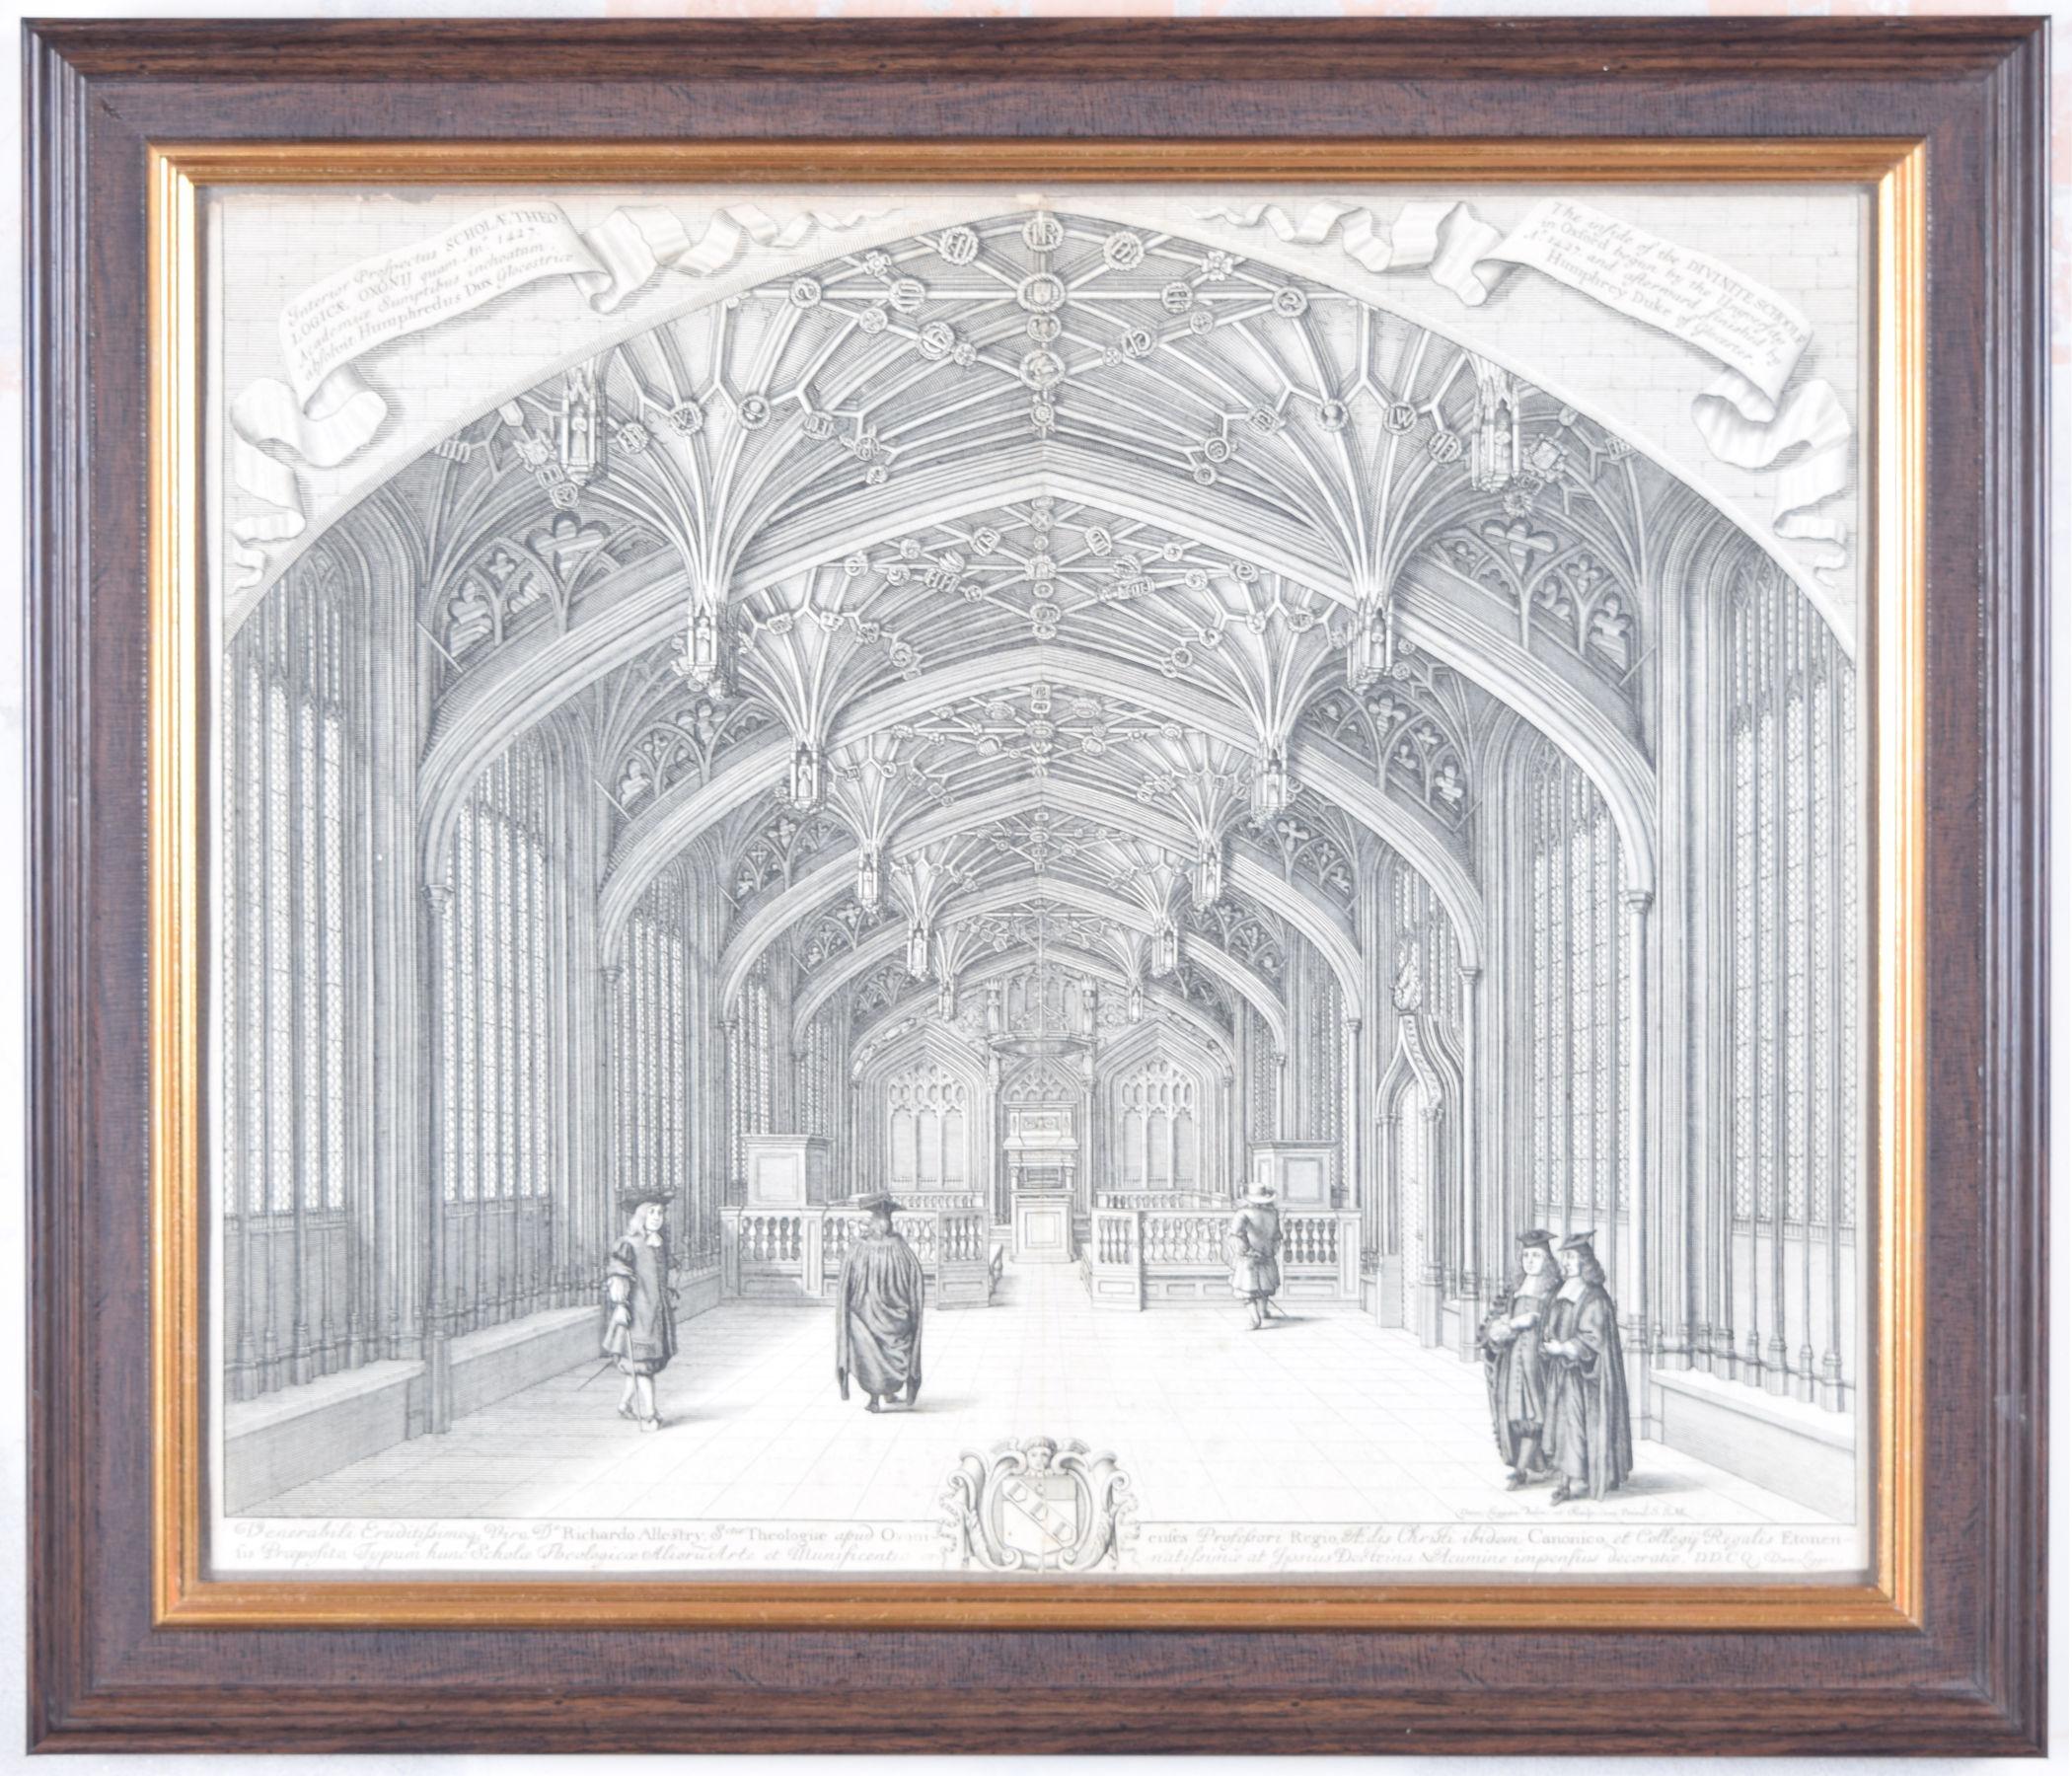 To see our other views of Oxford and Cambridge, scroll down to "More from this Seller" and below it click on "See all from this seller" - or send us a message if you cannot find the view you want.

David Loggan (1634 - 1692)
The Divinity School,